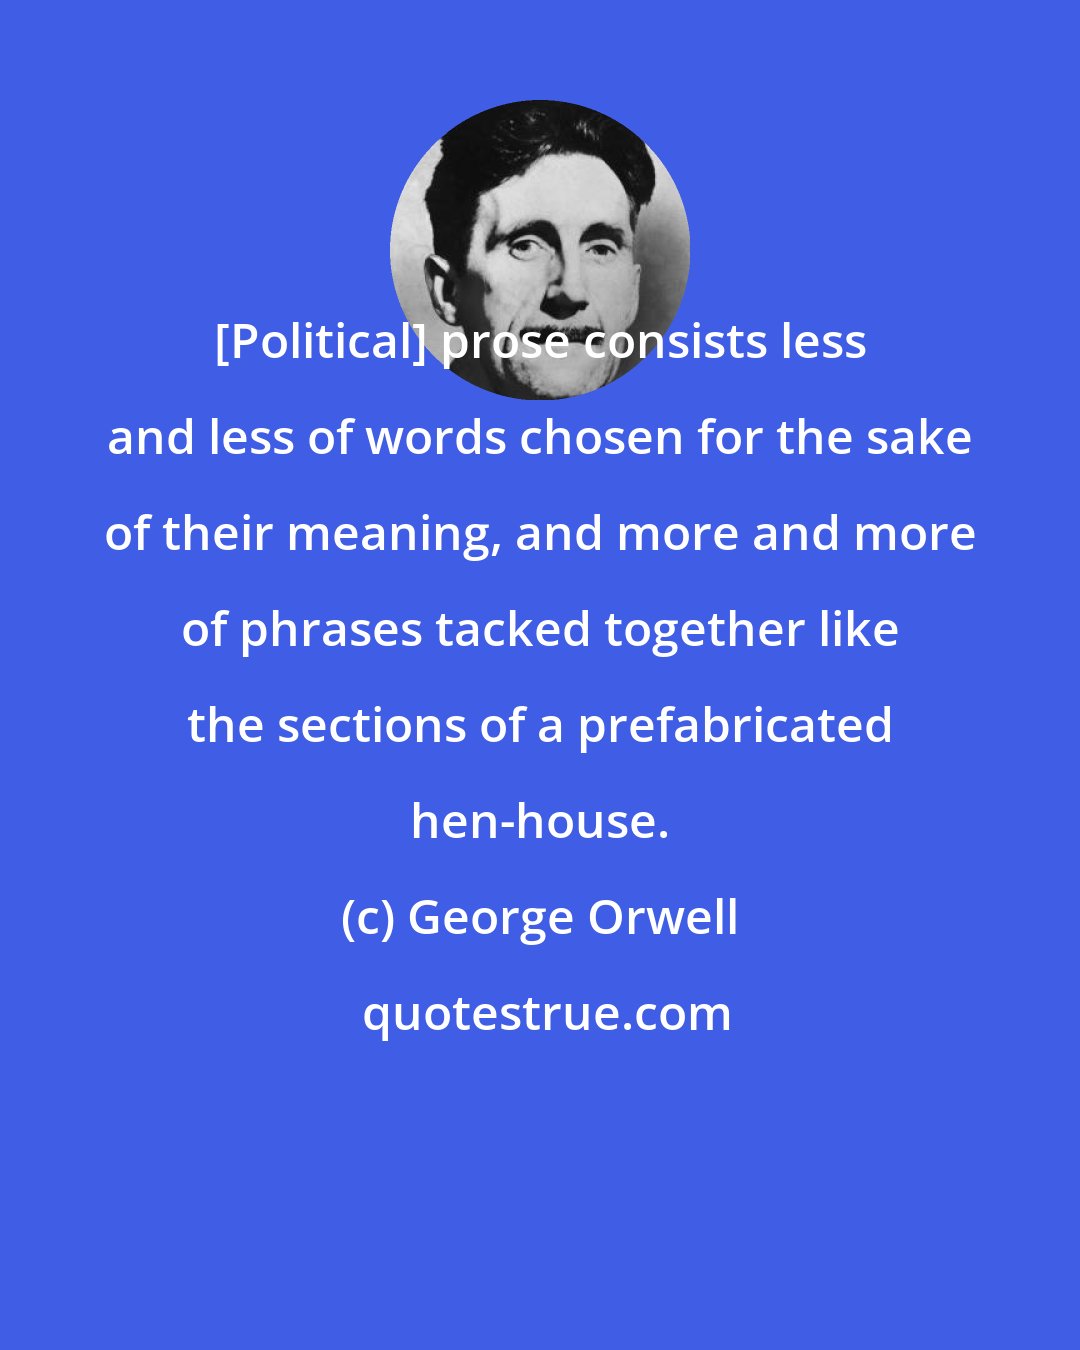 George Orwell: [Political] prose consists less and less of words chosen for the sake of their meaning, and more and more of phrases tacked together like the sections of a prefabricated hen-house.